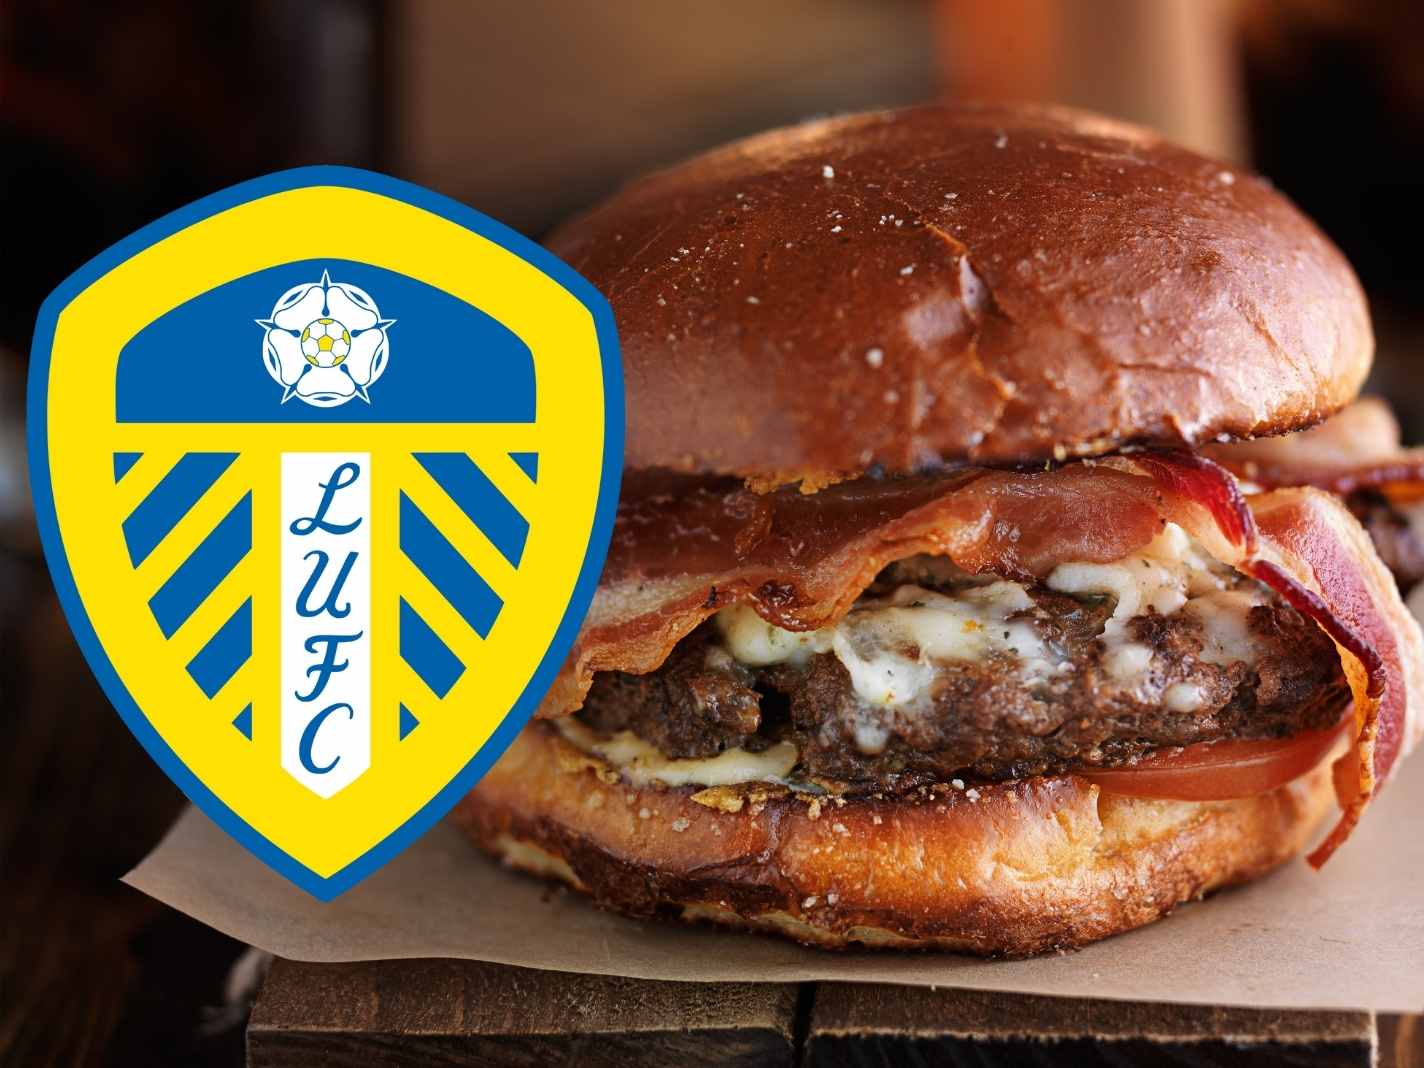 This Overcooked Cheeseburger At Elland Road Will Totally Ruin Your Evening